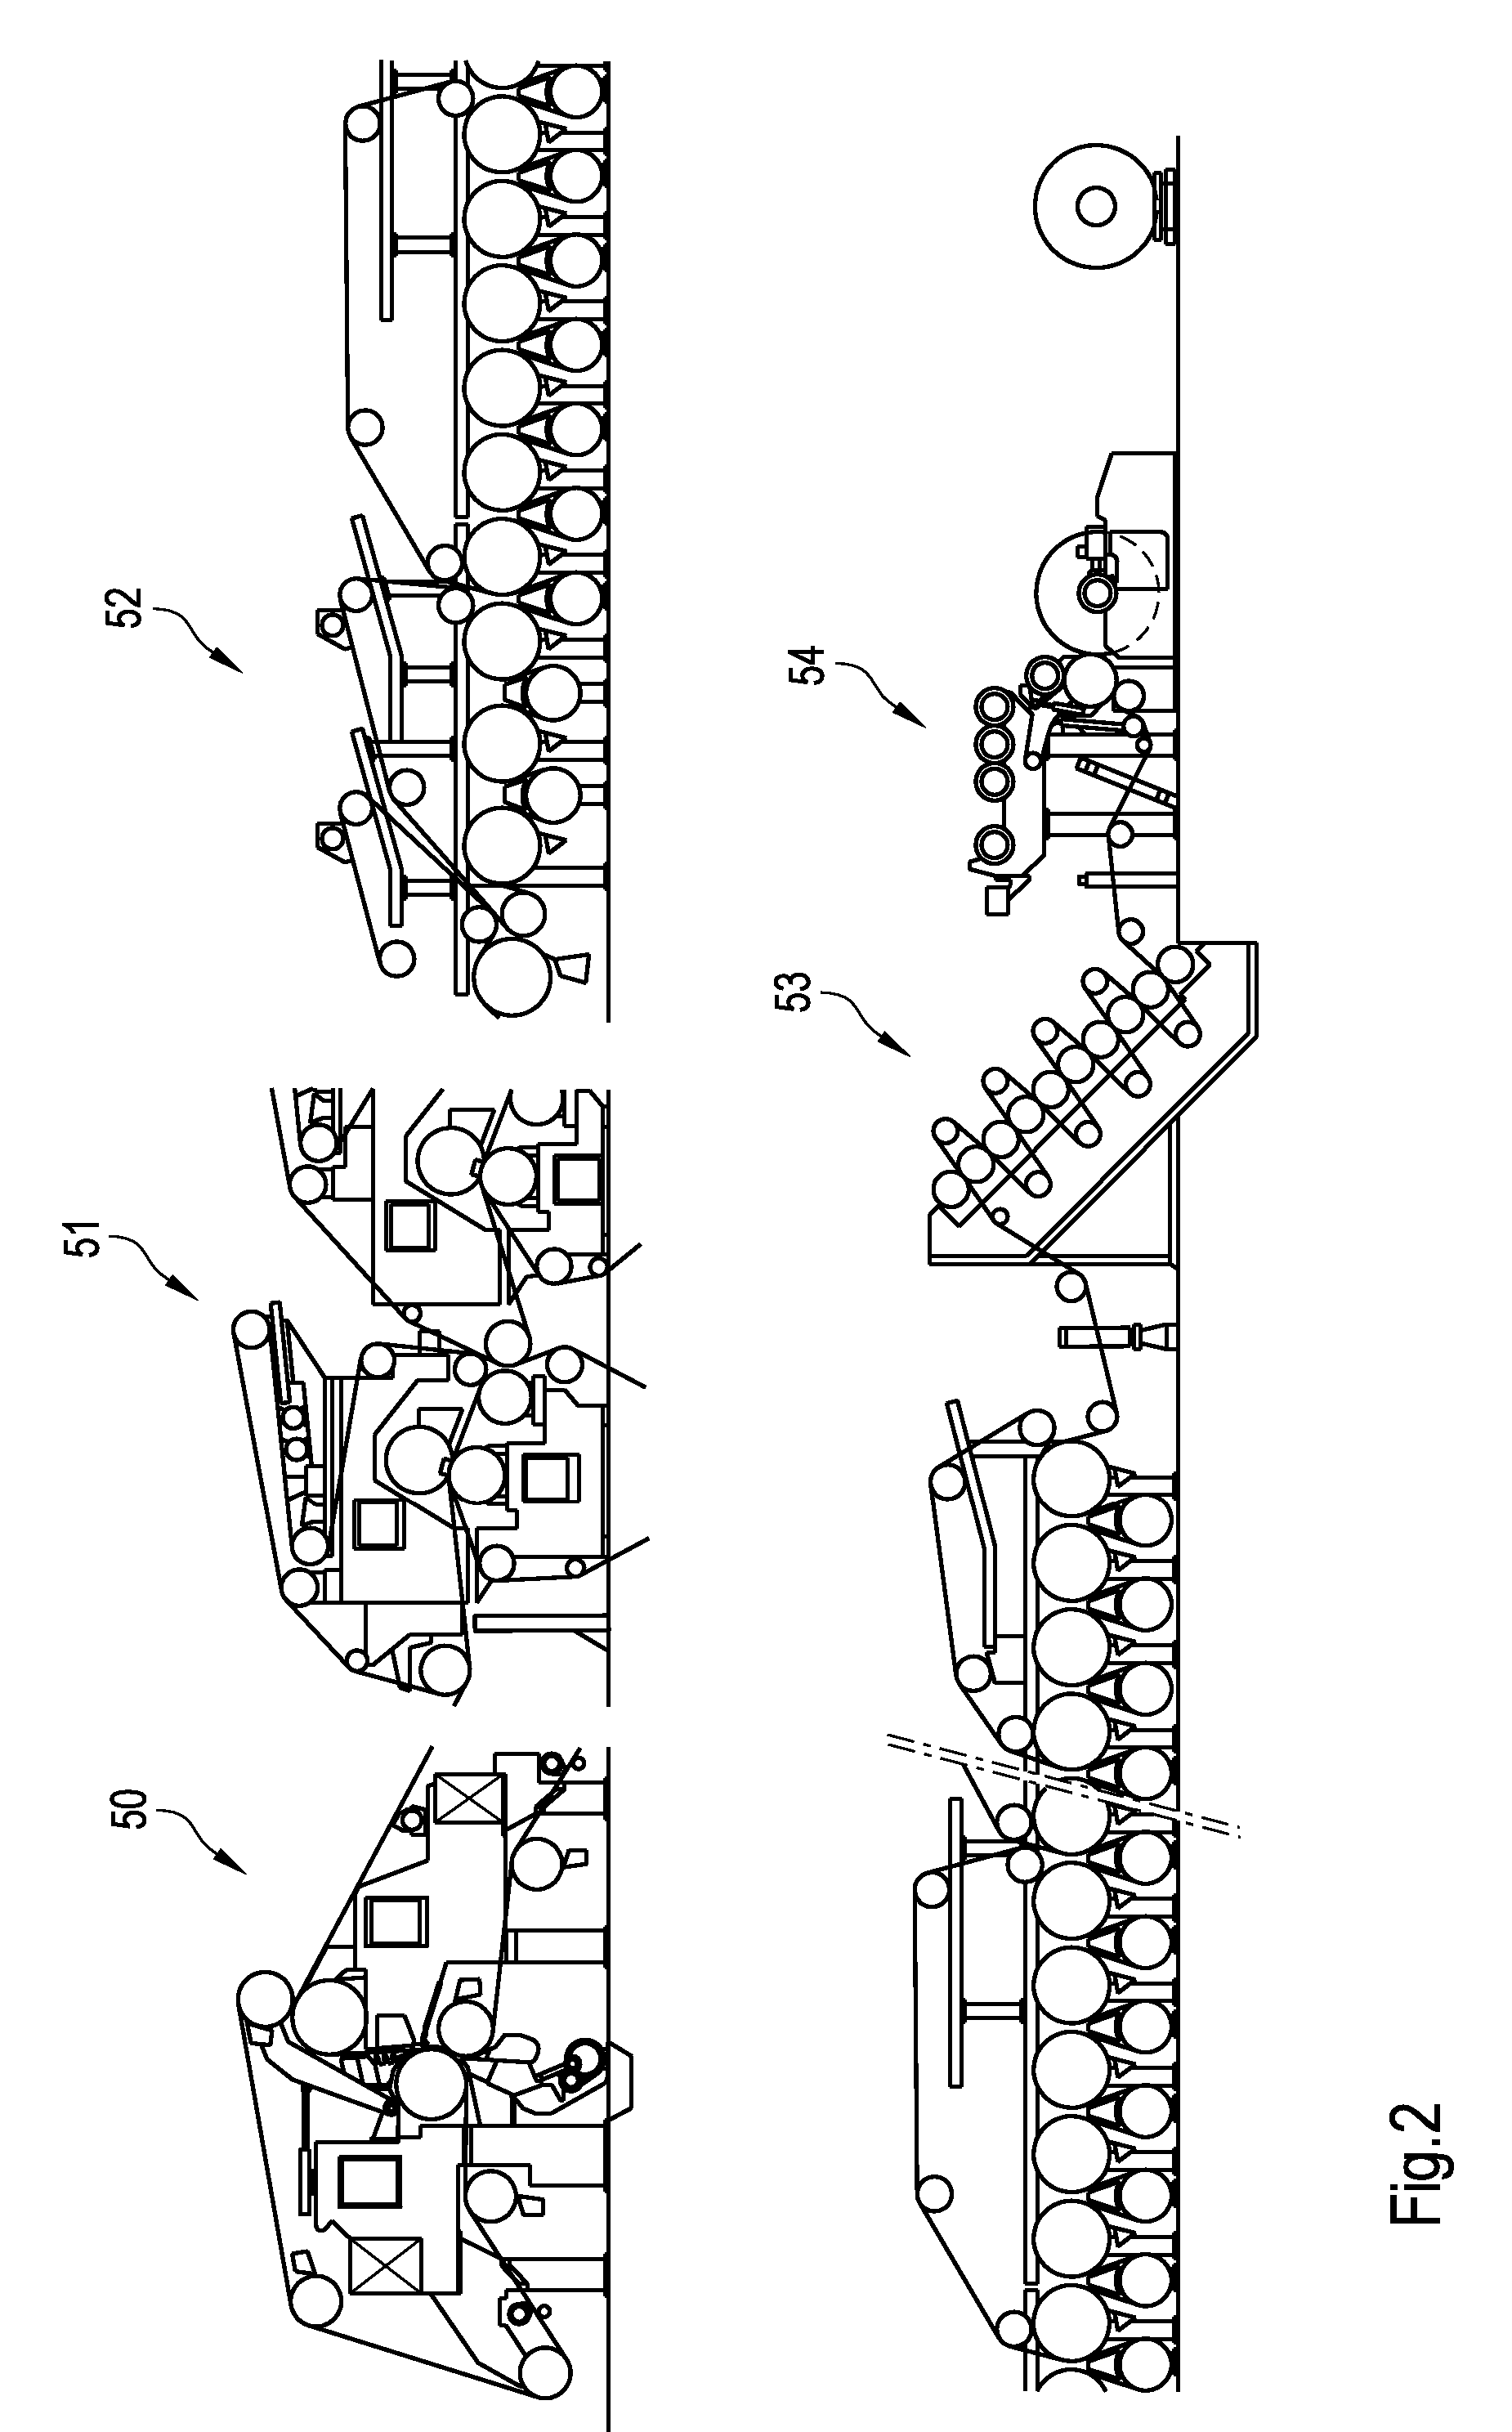 Method and apparatus of the prepartion of a fibrous stock suspension